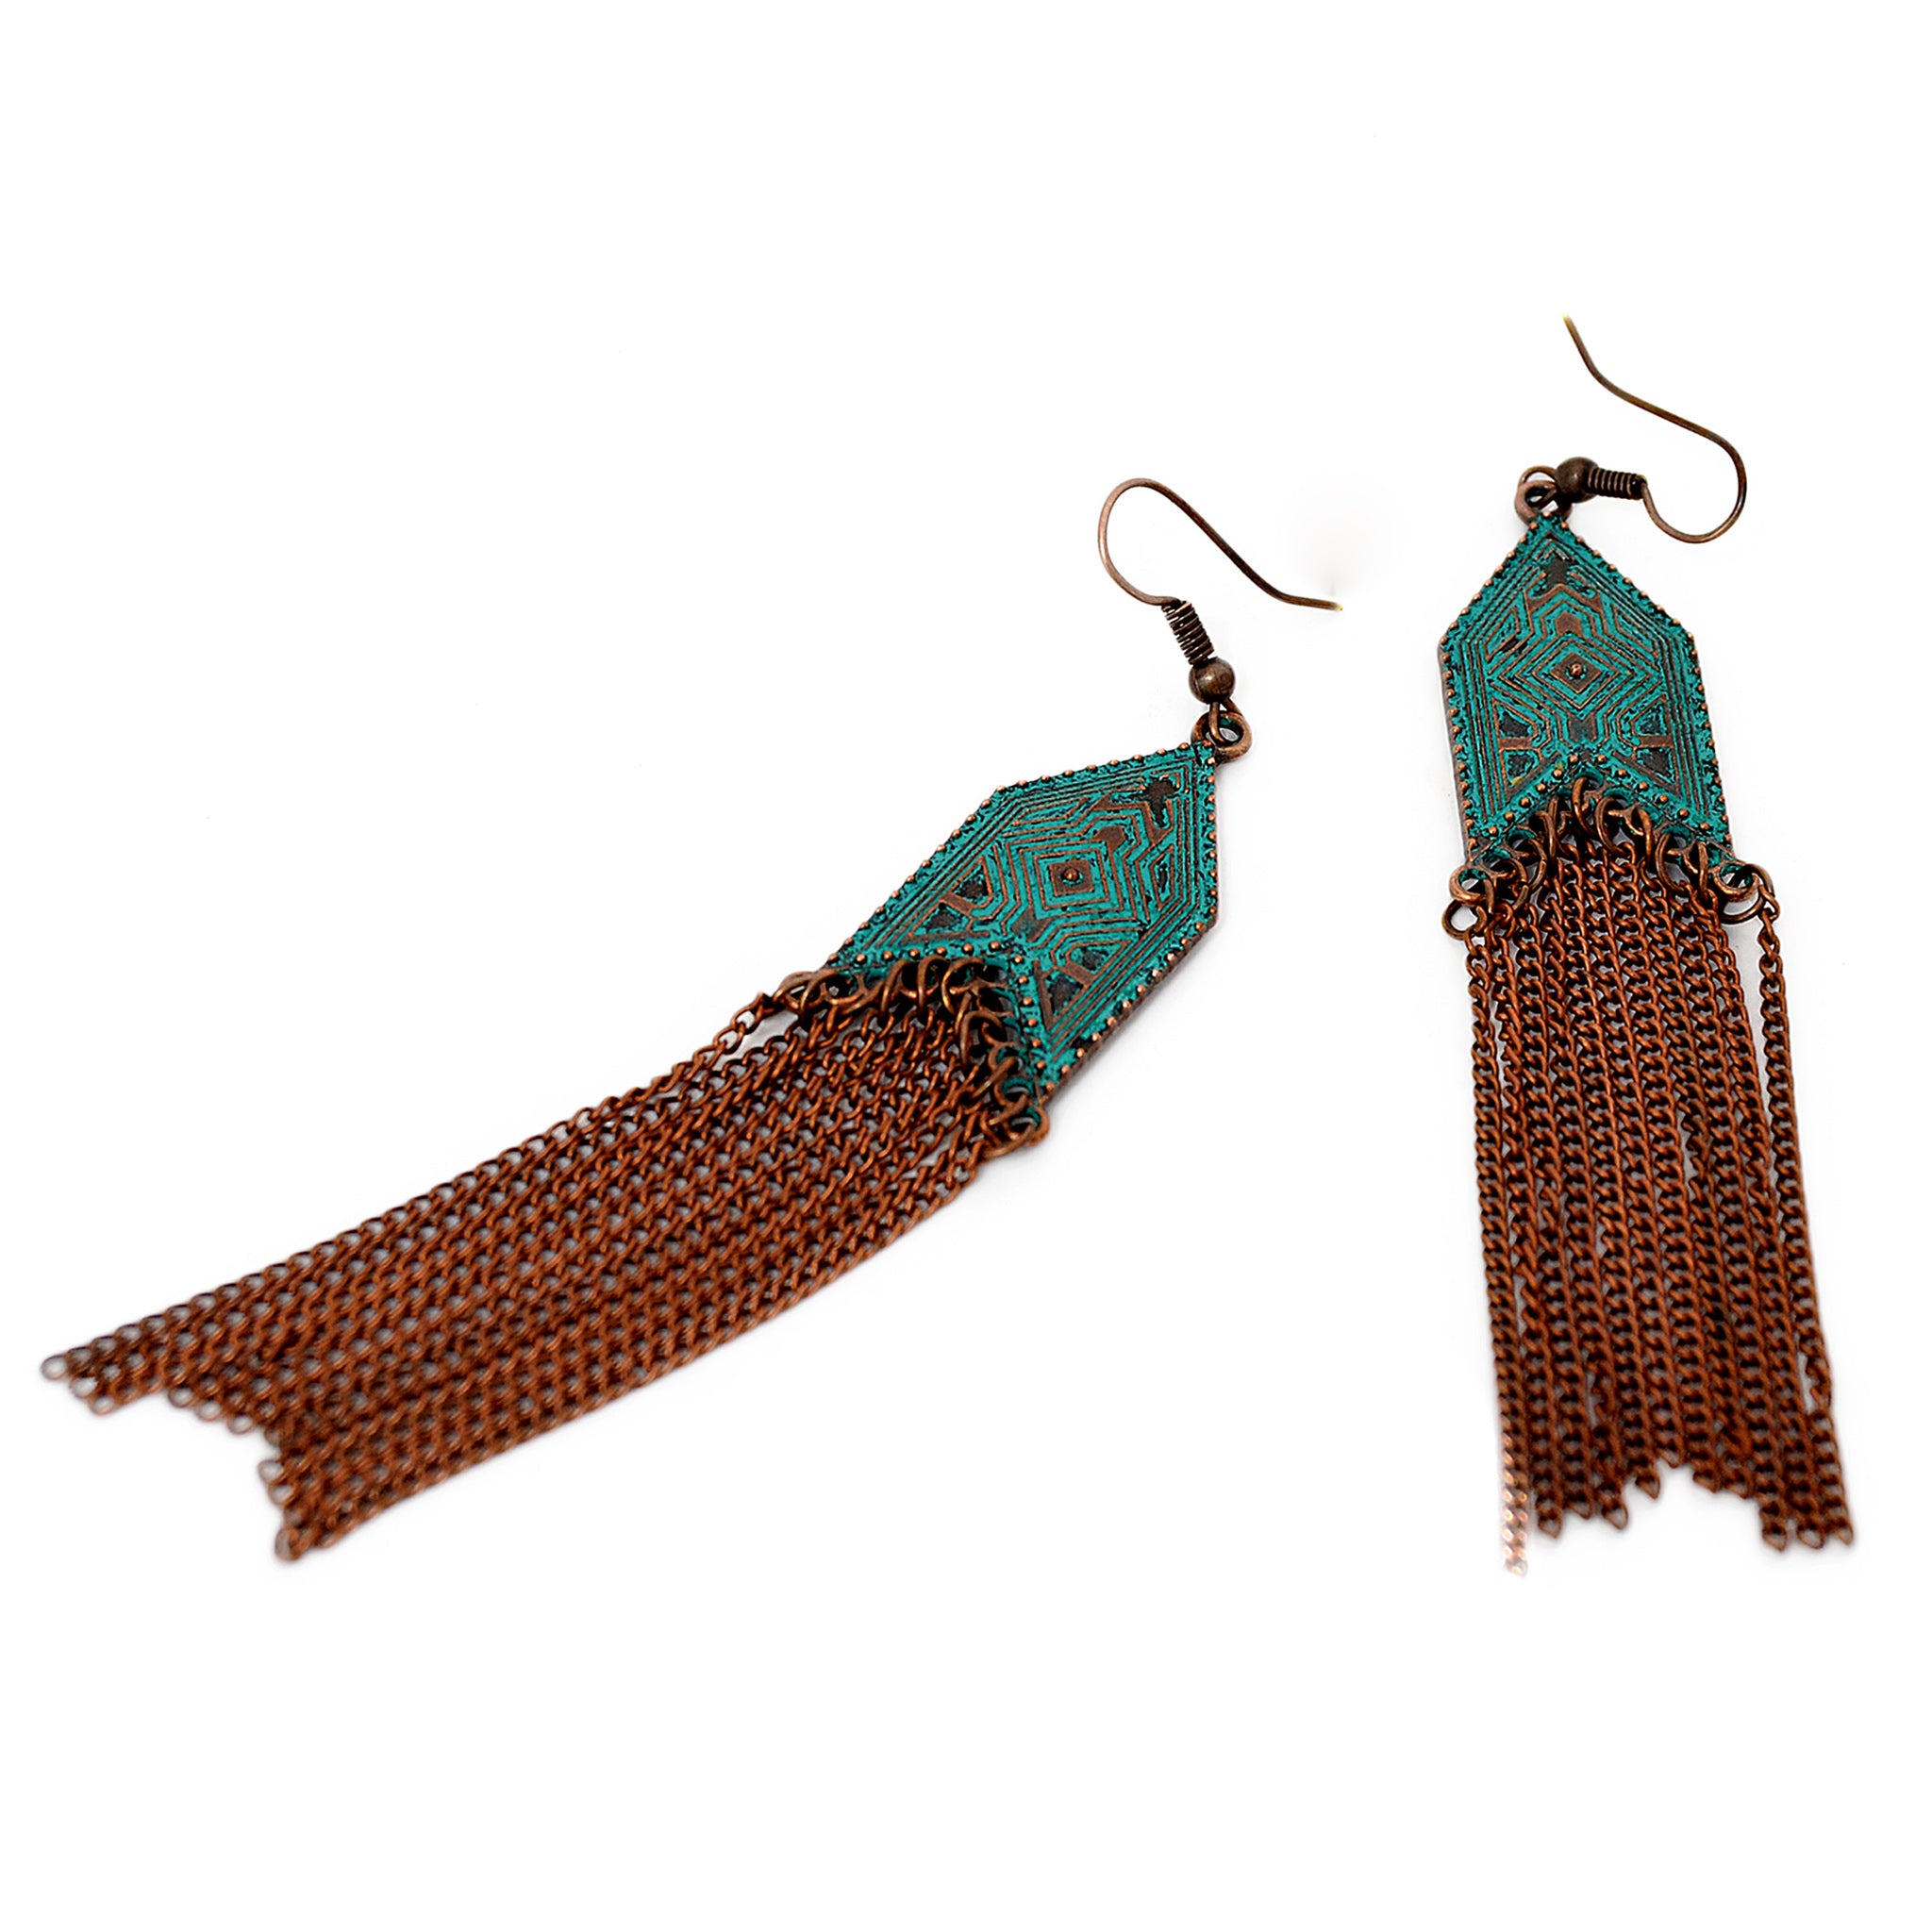 Multi chain hanging earrings with geometric design and green blue patina on copper